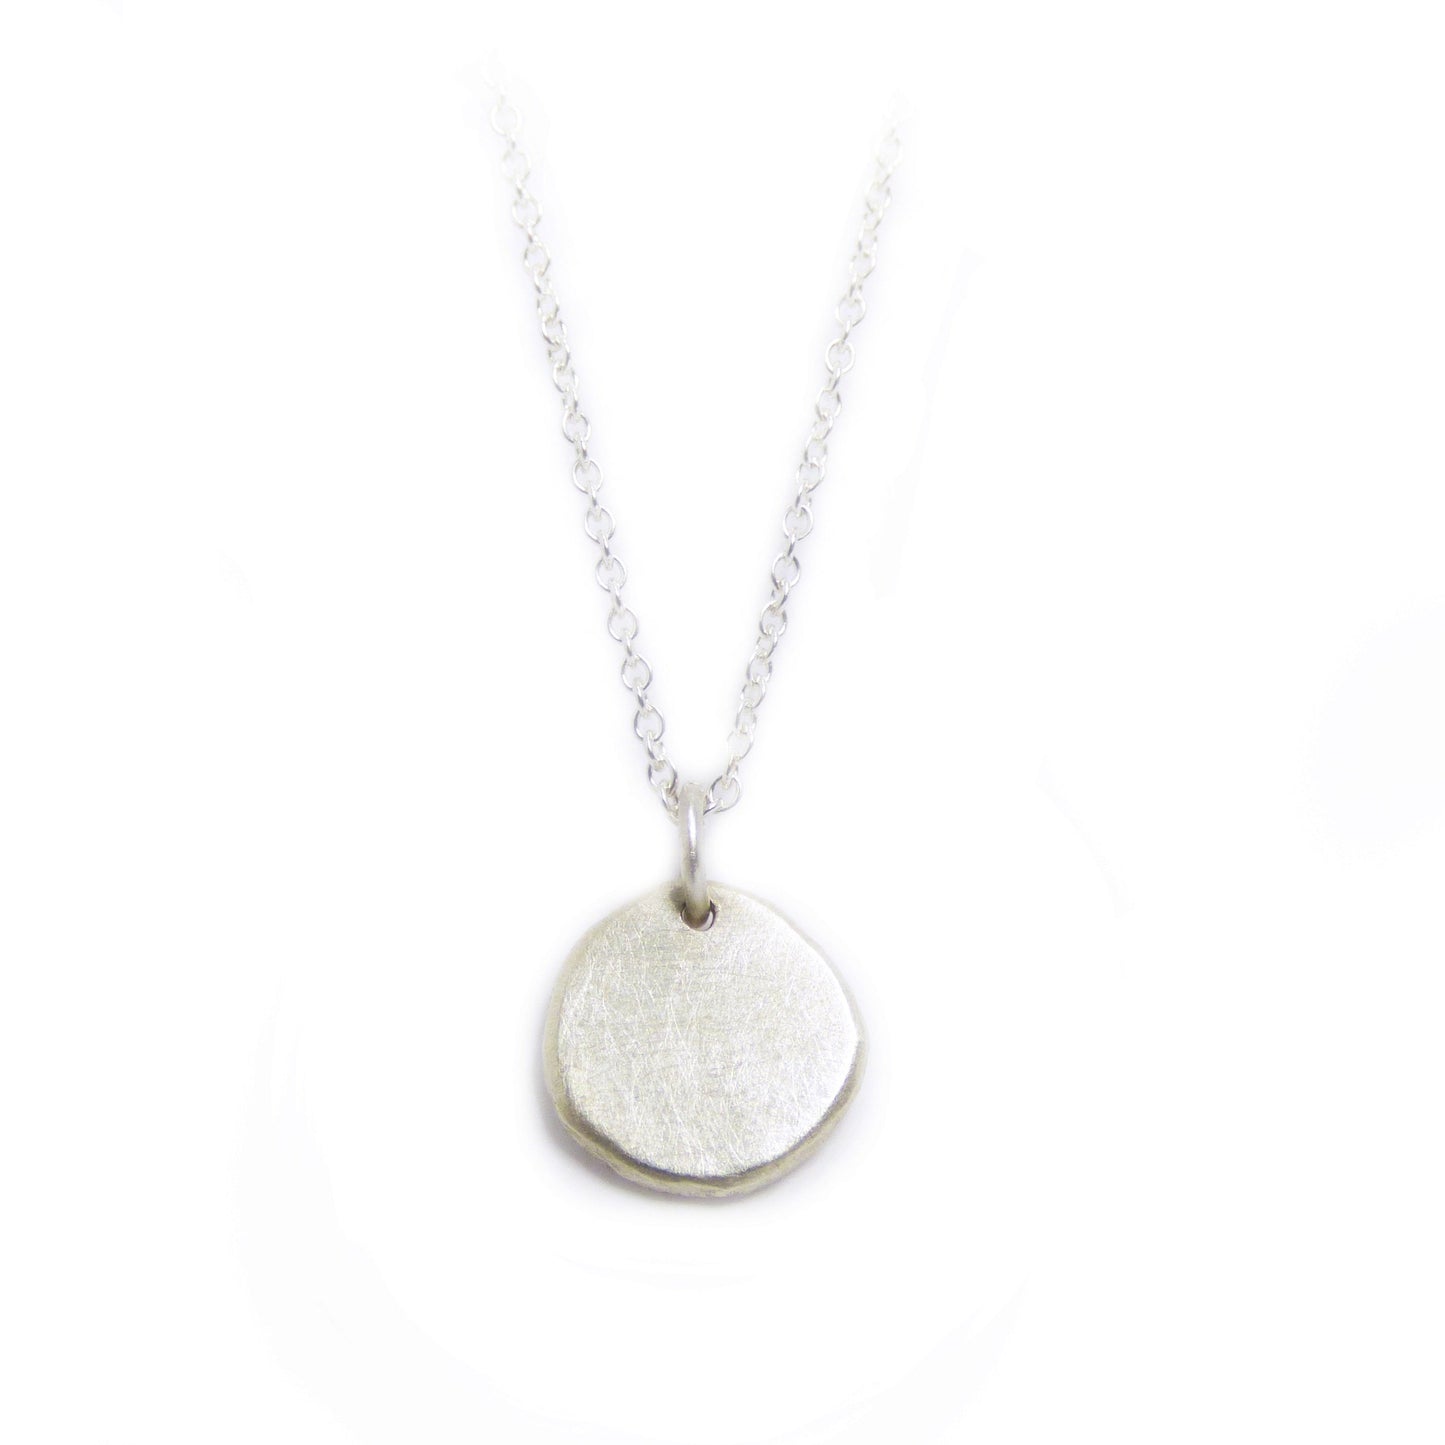 Serendipity Pendant: Sterling Silver